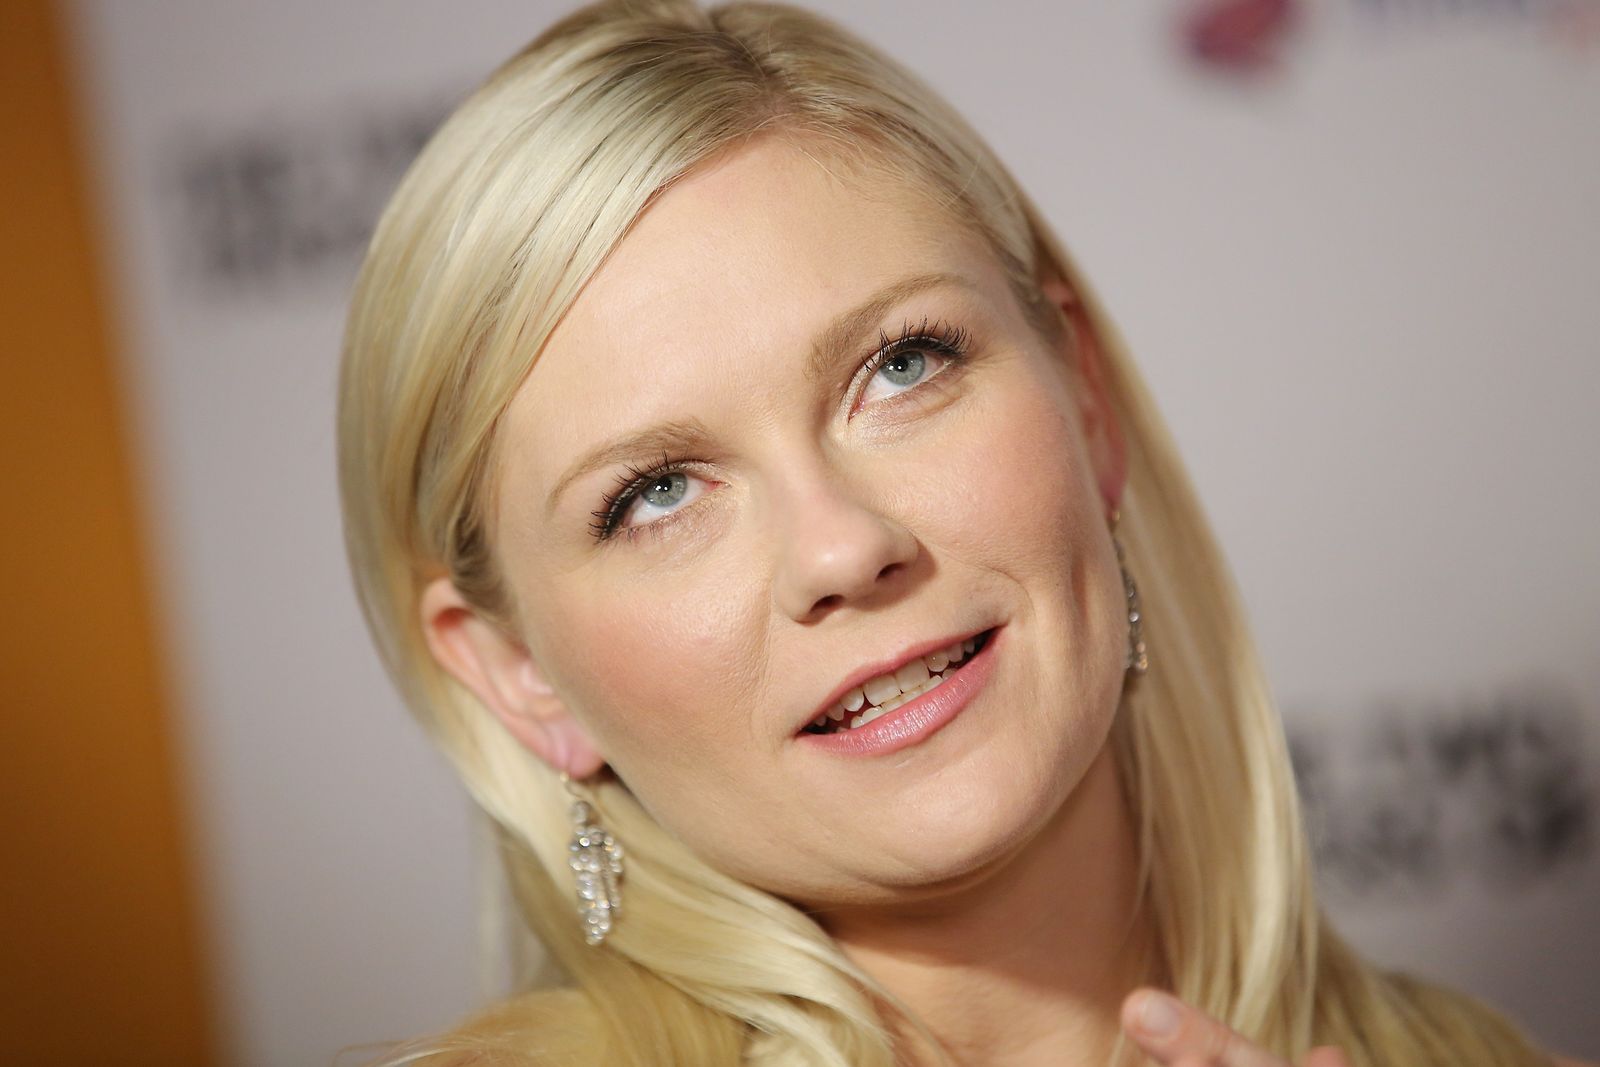 Kirsten Dunst Co-wrote And Made Her Directorial Debut With The Bell Jar